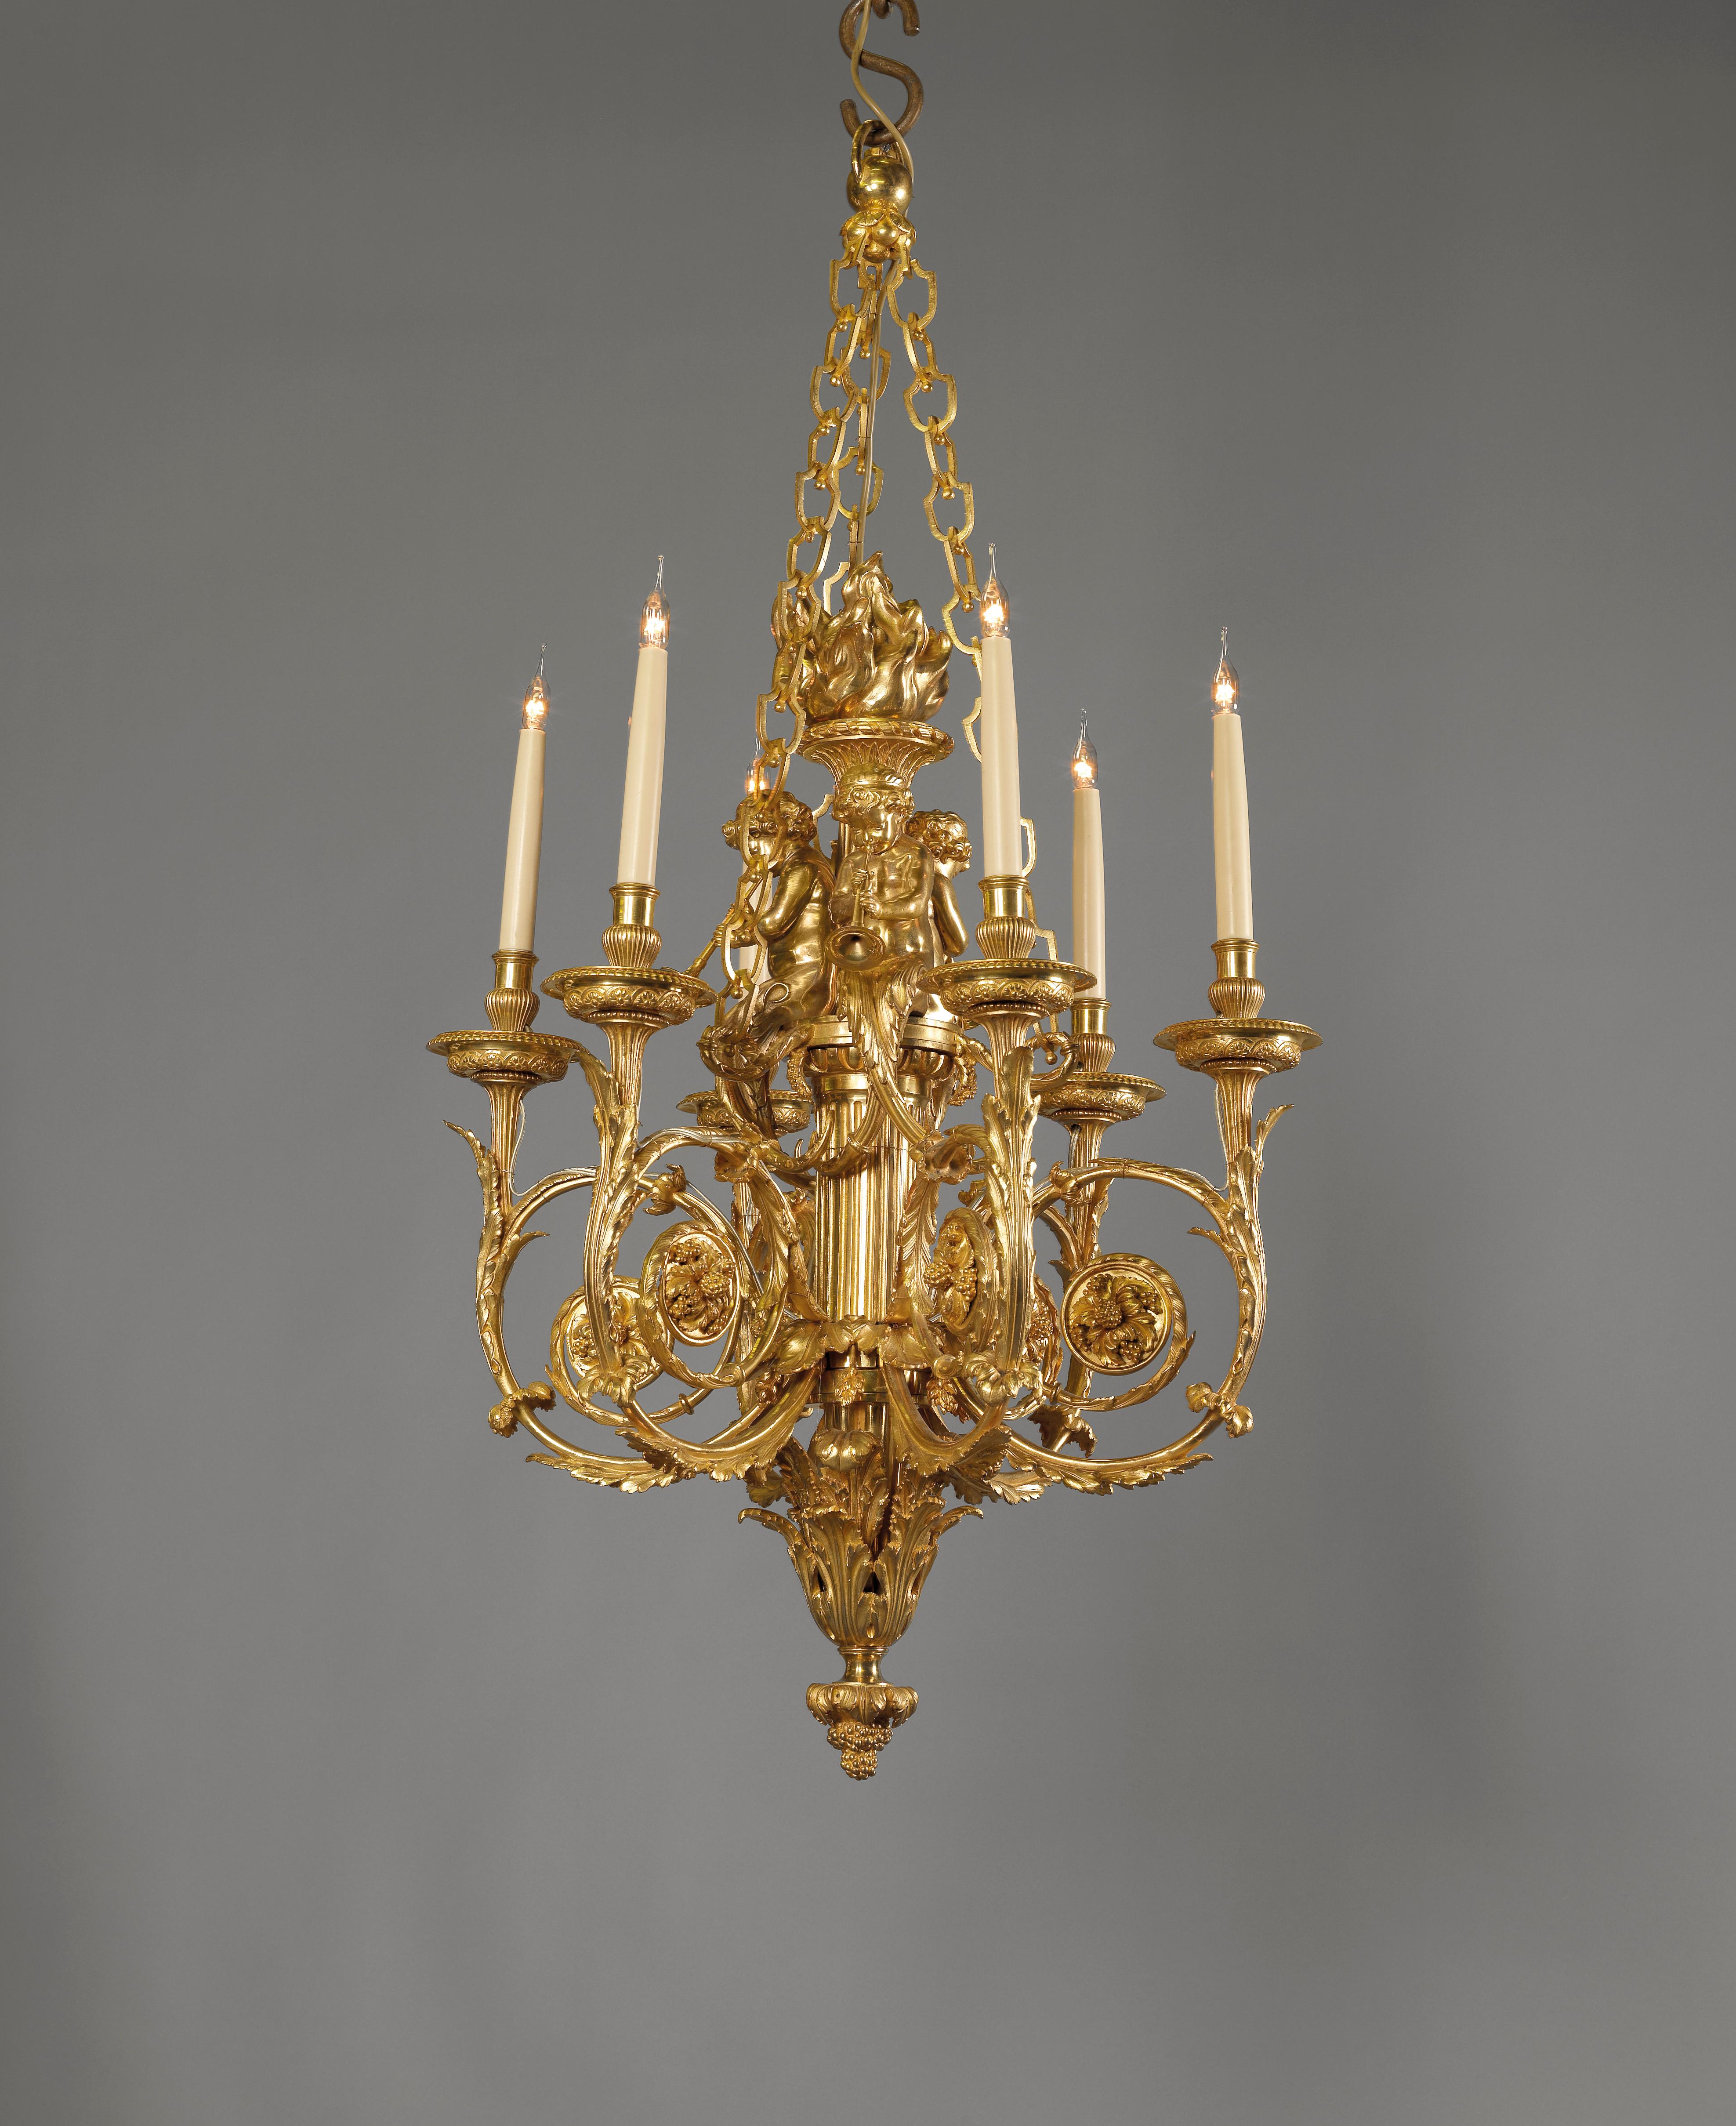 A fine Louis XVI style gilt bronze cherub six-light chandelier, after the model by Pierre Gouthière for Marie Antoinette. The chandelier having elaborate acanthus scrolling arms issued from a classical torch stem surmounted by three perching